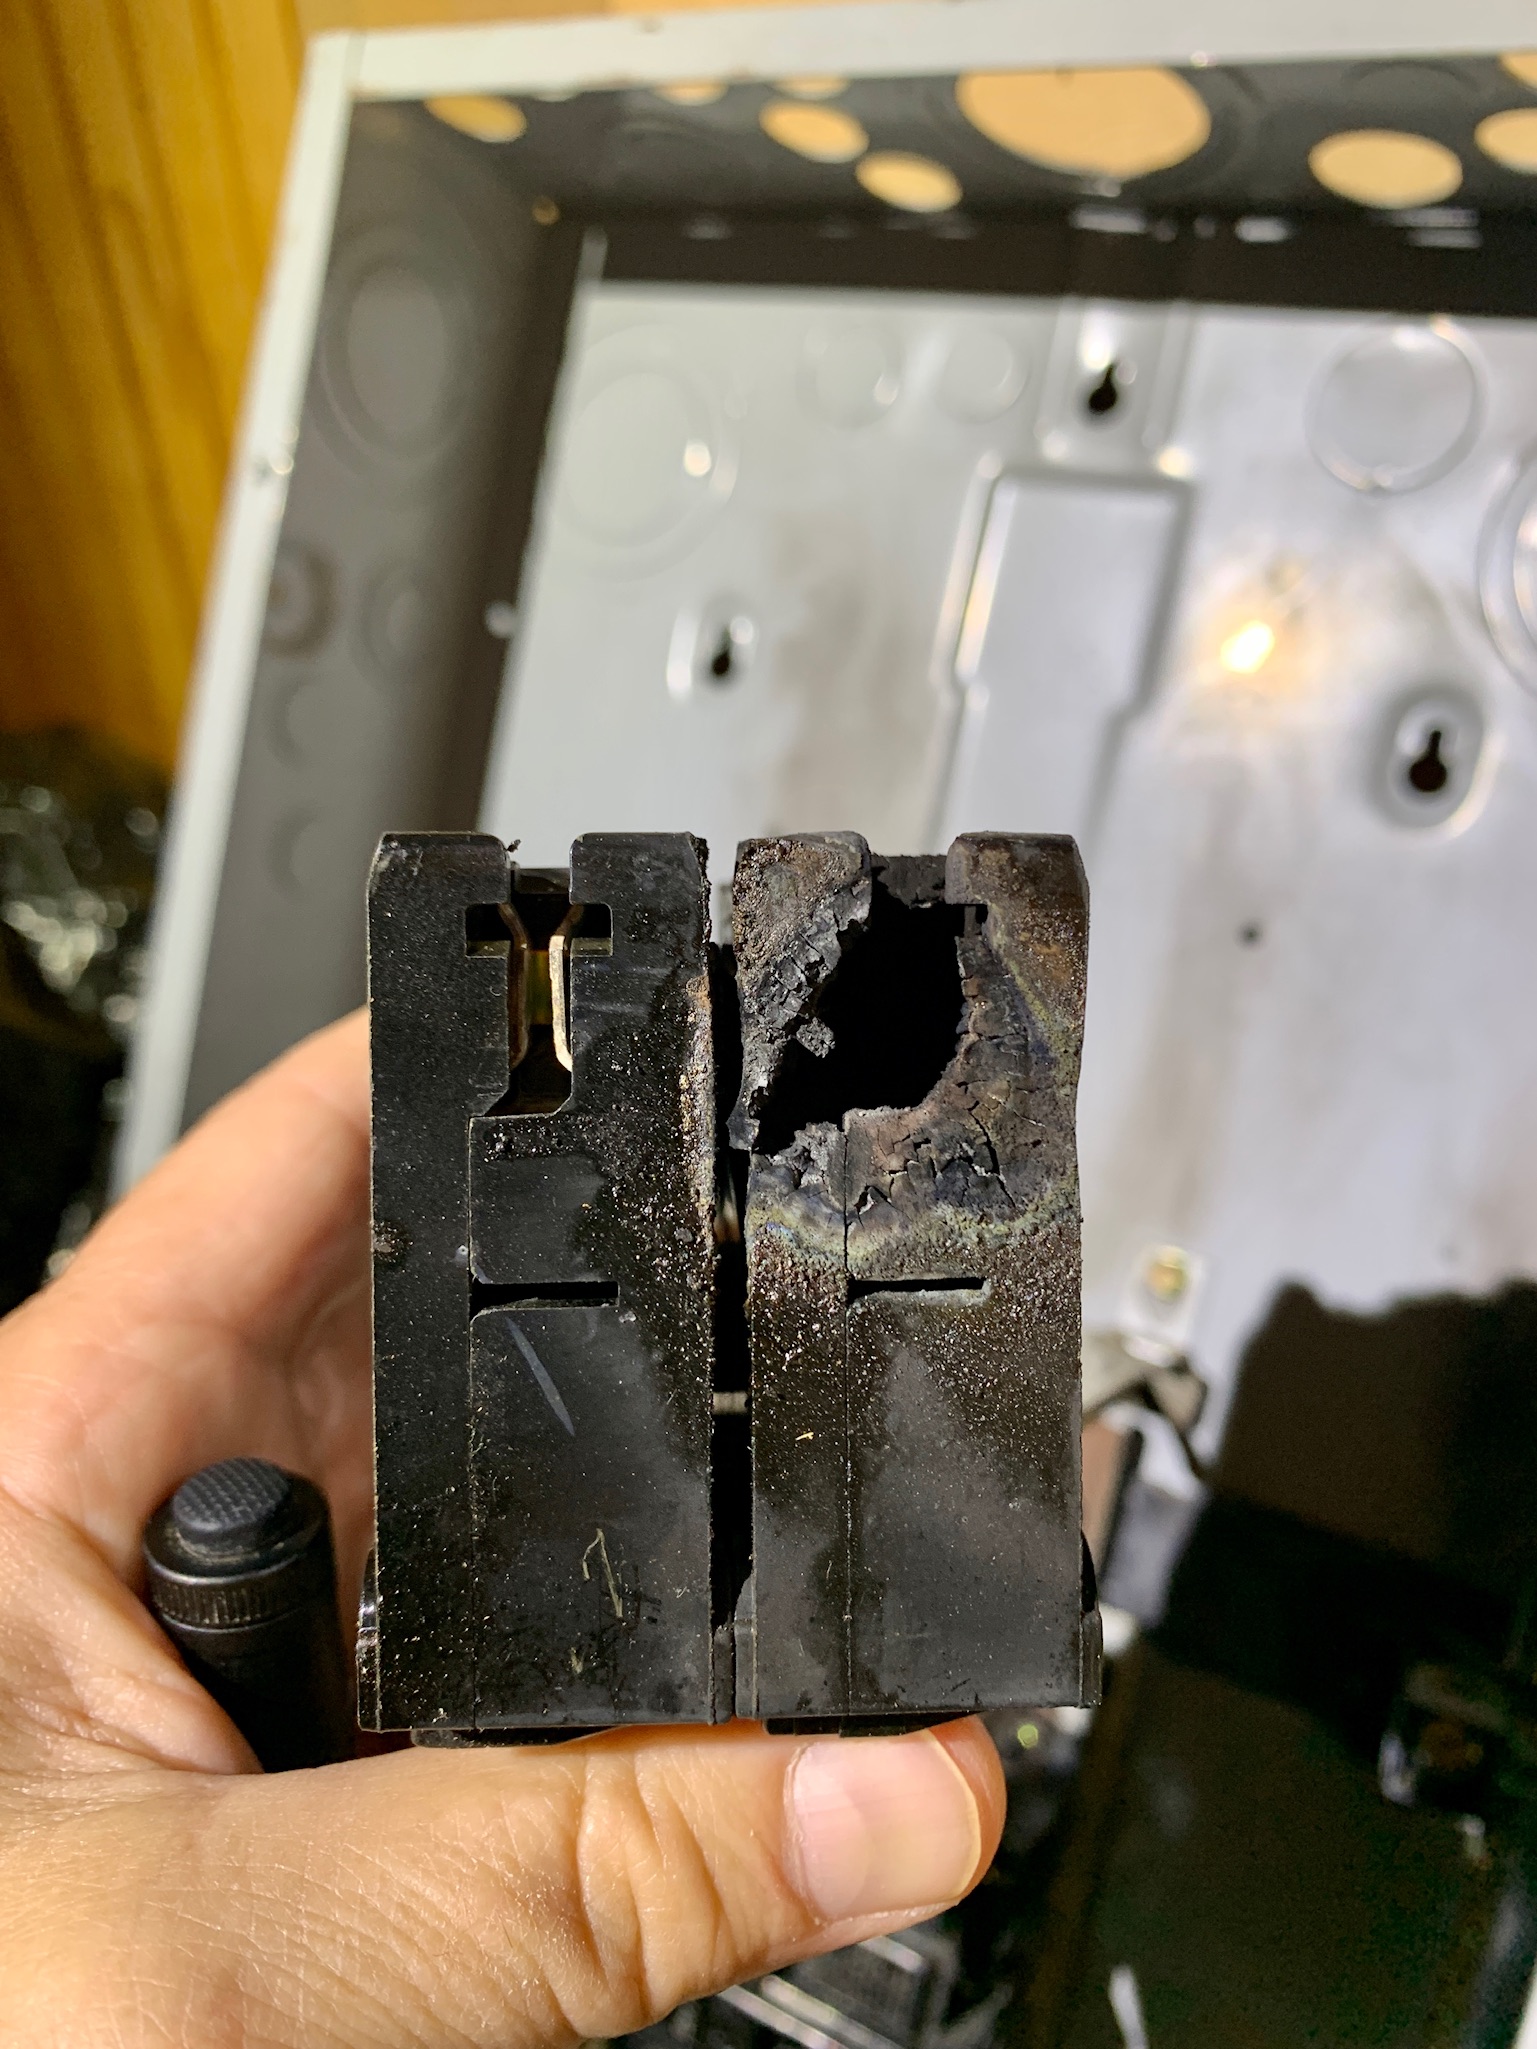 Burnt Breaker and need panel replacement in Holly Springs